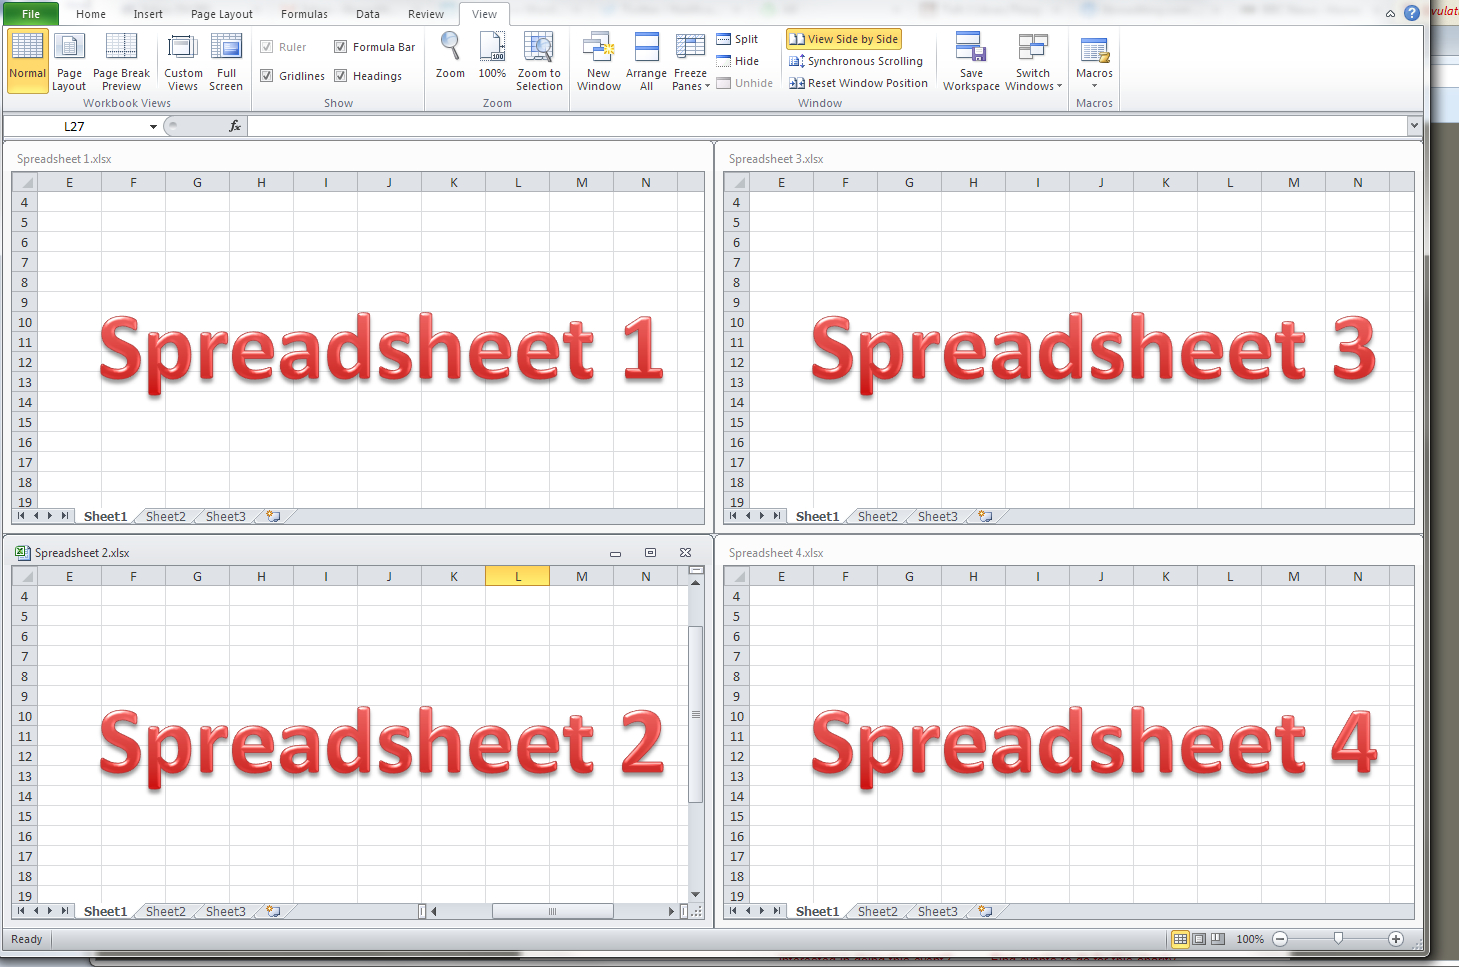 How To Merge Excel Spreadsheets For Merge Excel Files Into One Workbook Spreadsheets Without Duplicates